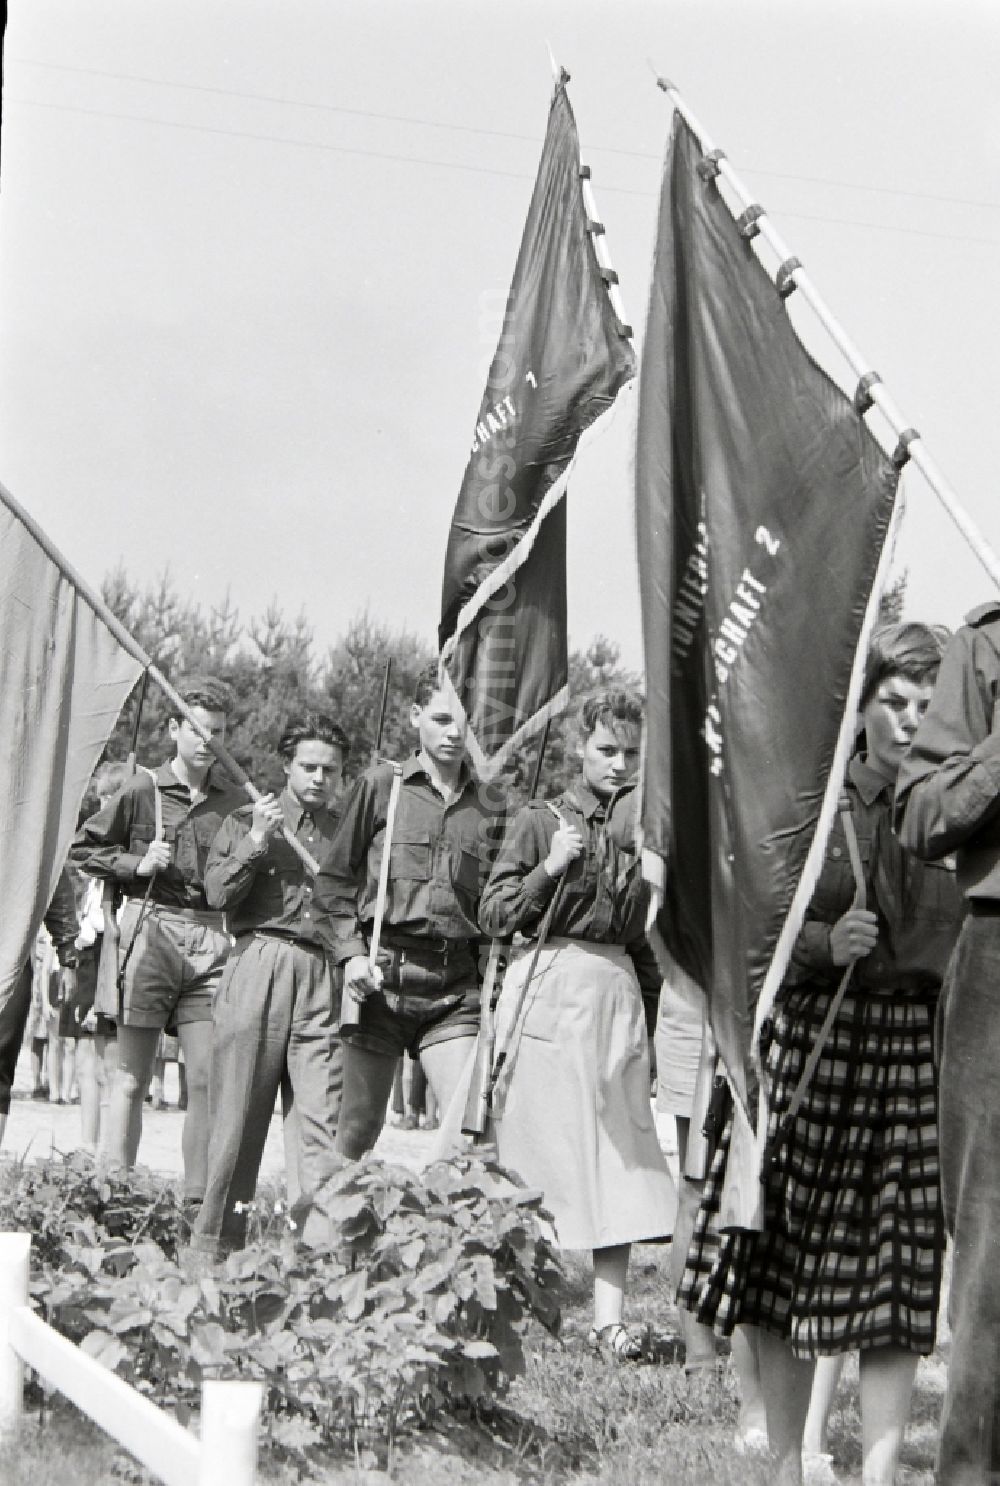 GDR photo archive: Prerow - Day Appell in summer camp with students and youth in FDJ uniform with flags and banners in the summer camp Kim Ir Sen of the pioneer organization Ernst Thalmann in Prerow in the state Mecklenburg-Western Pomerania on the territory of the former GDR, German Democratic Republic